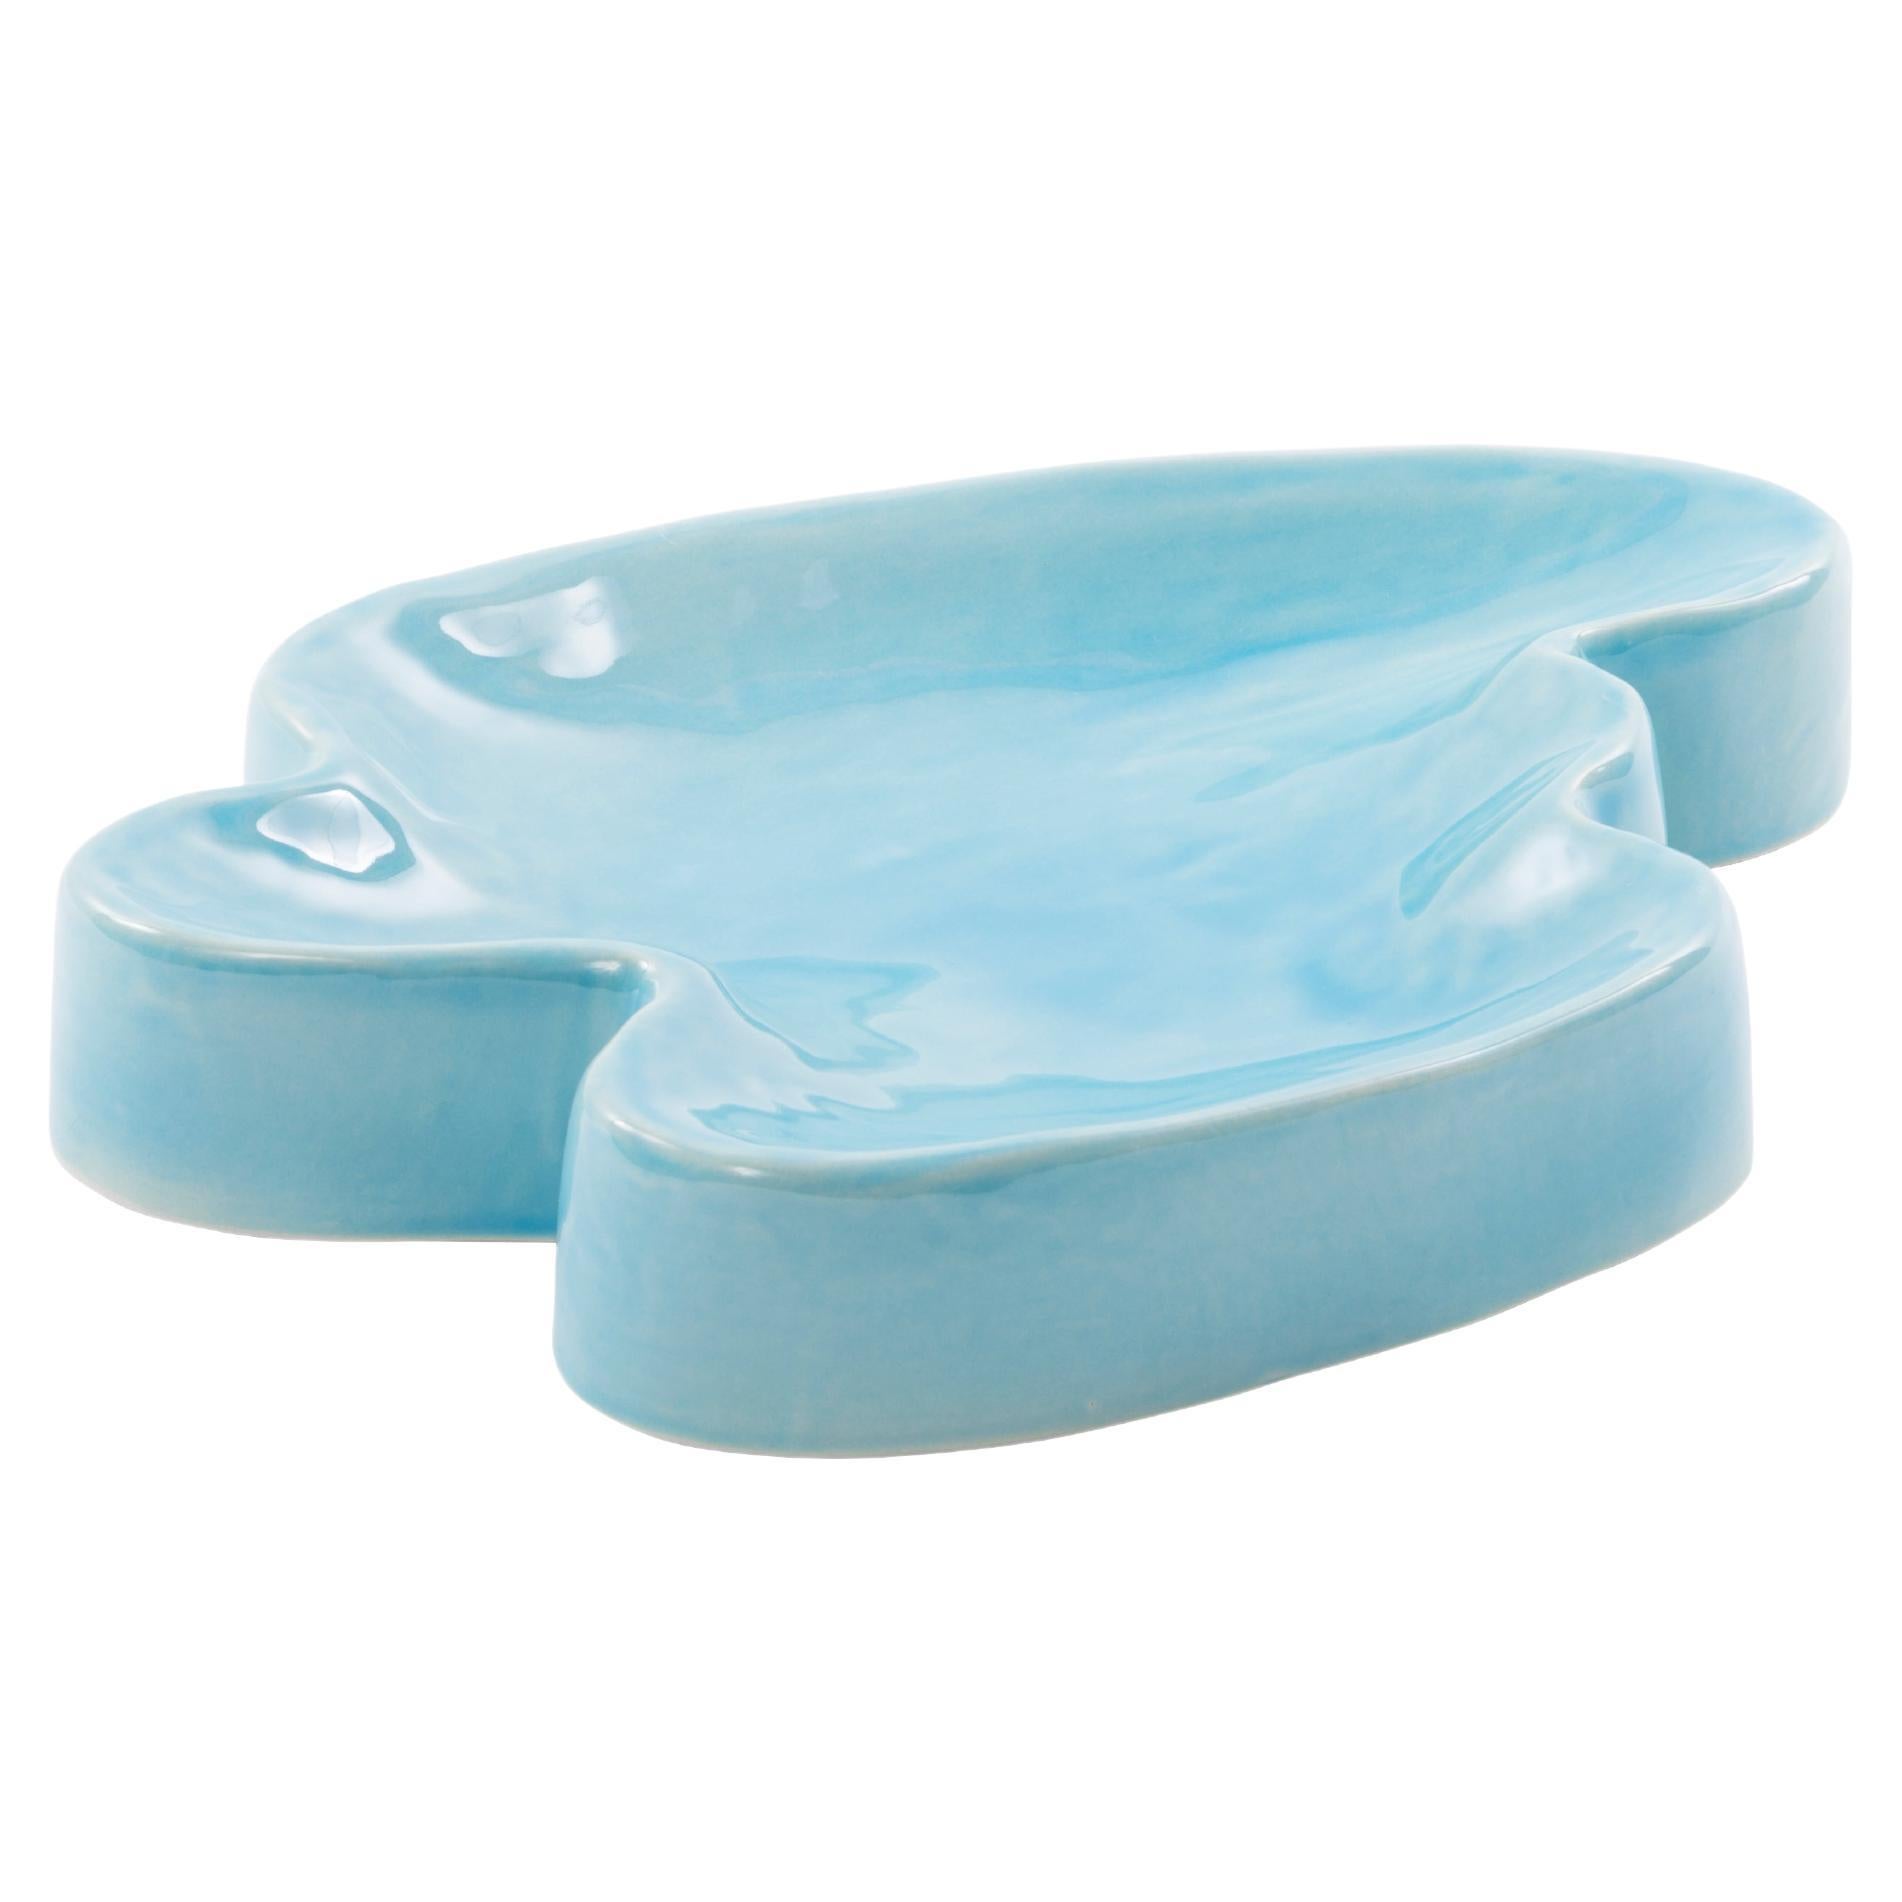 Lake Small Tropical Turquoise Tray by Pulpo For Sale